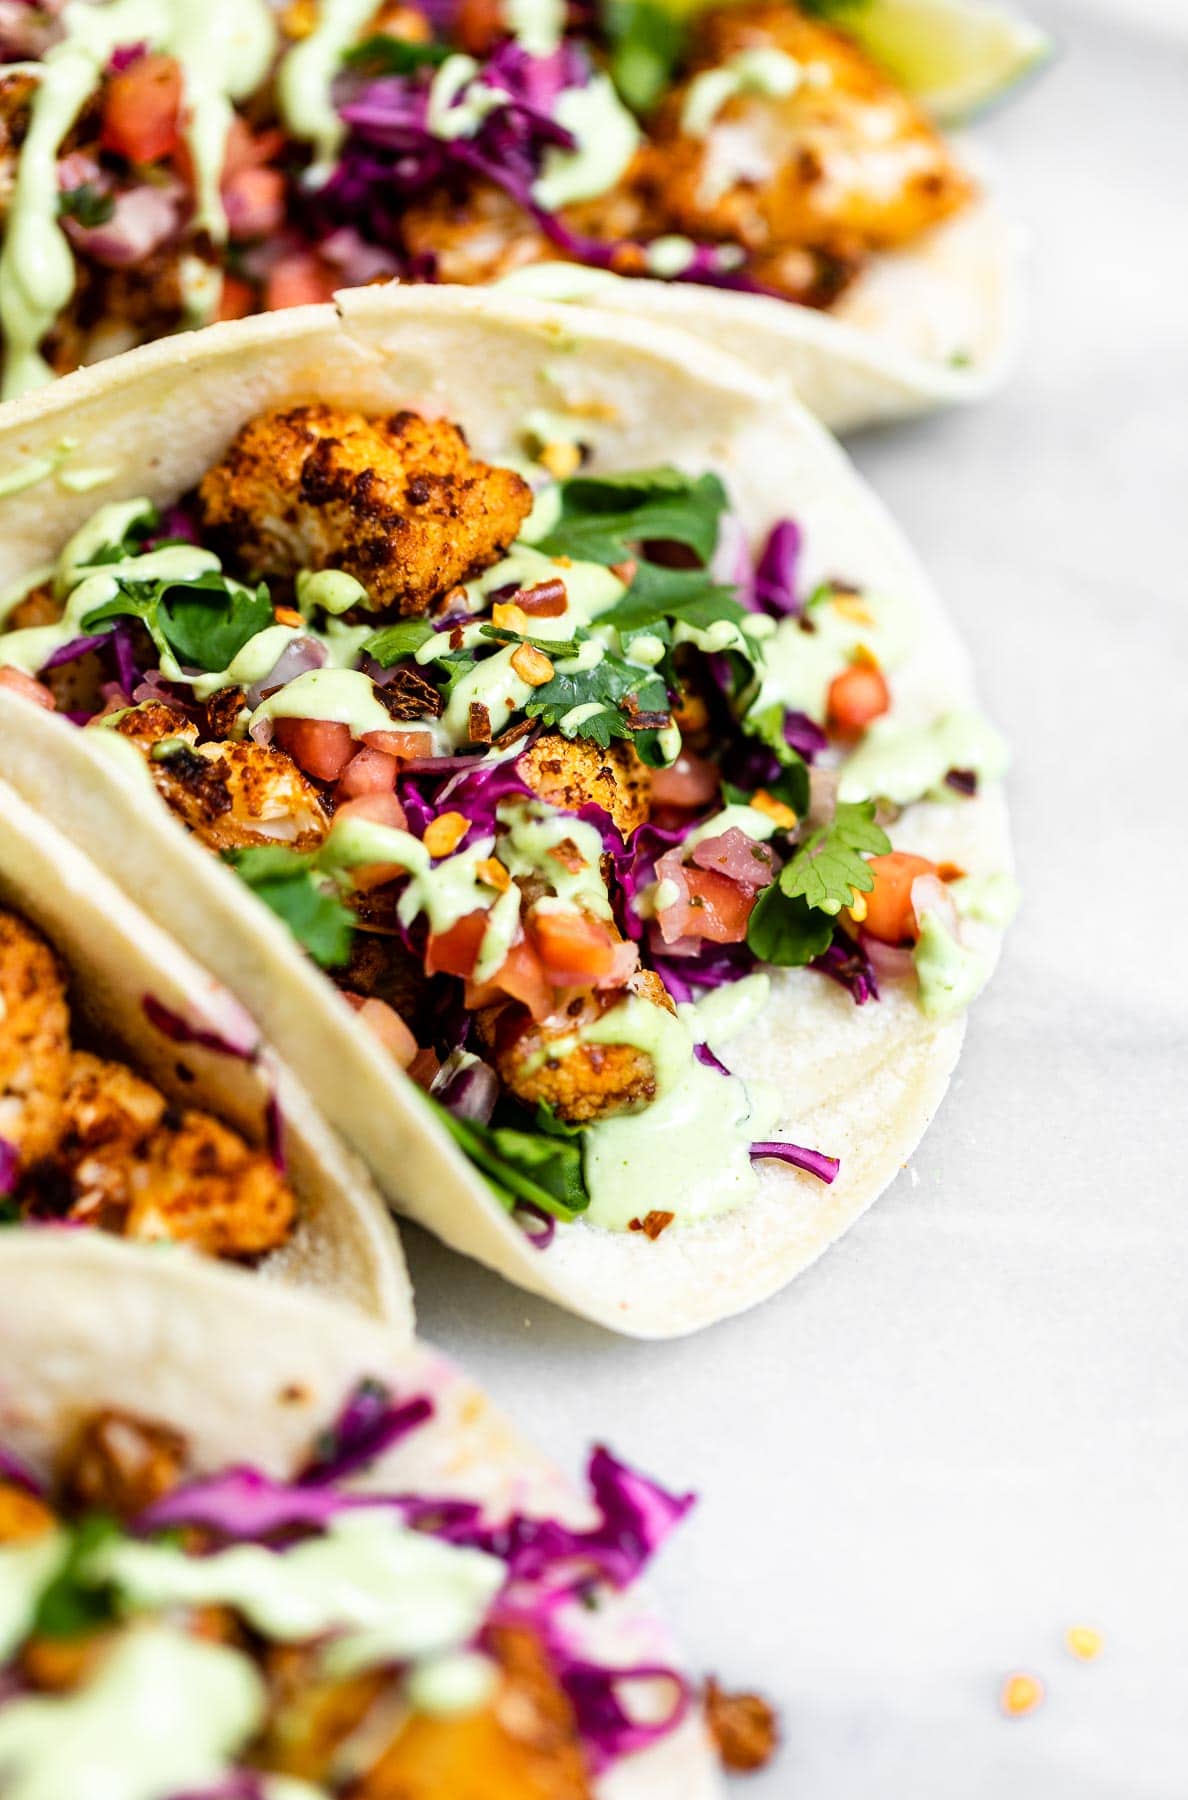 Up close image of the cauliflower tacos to show texture.